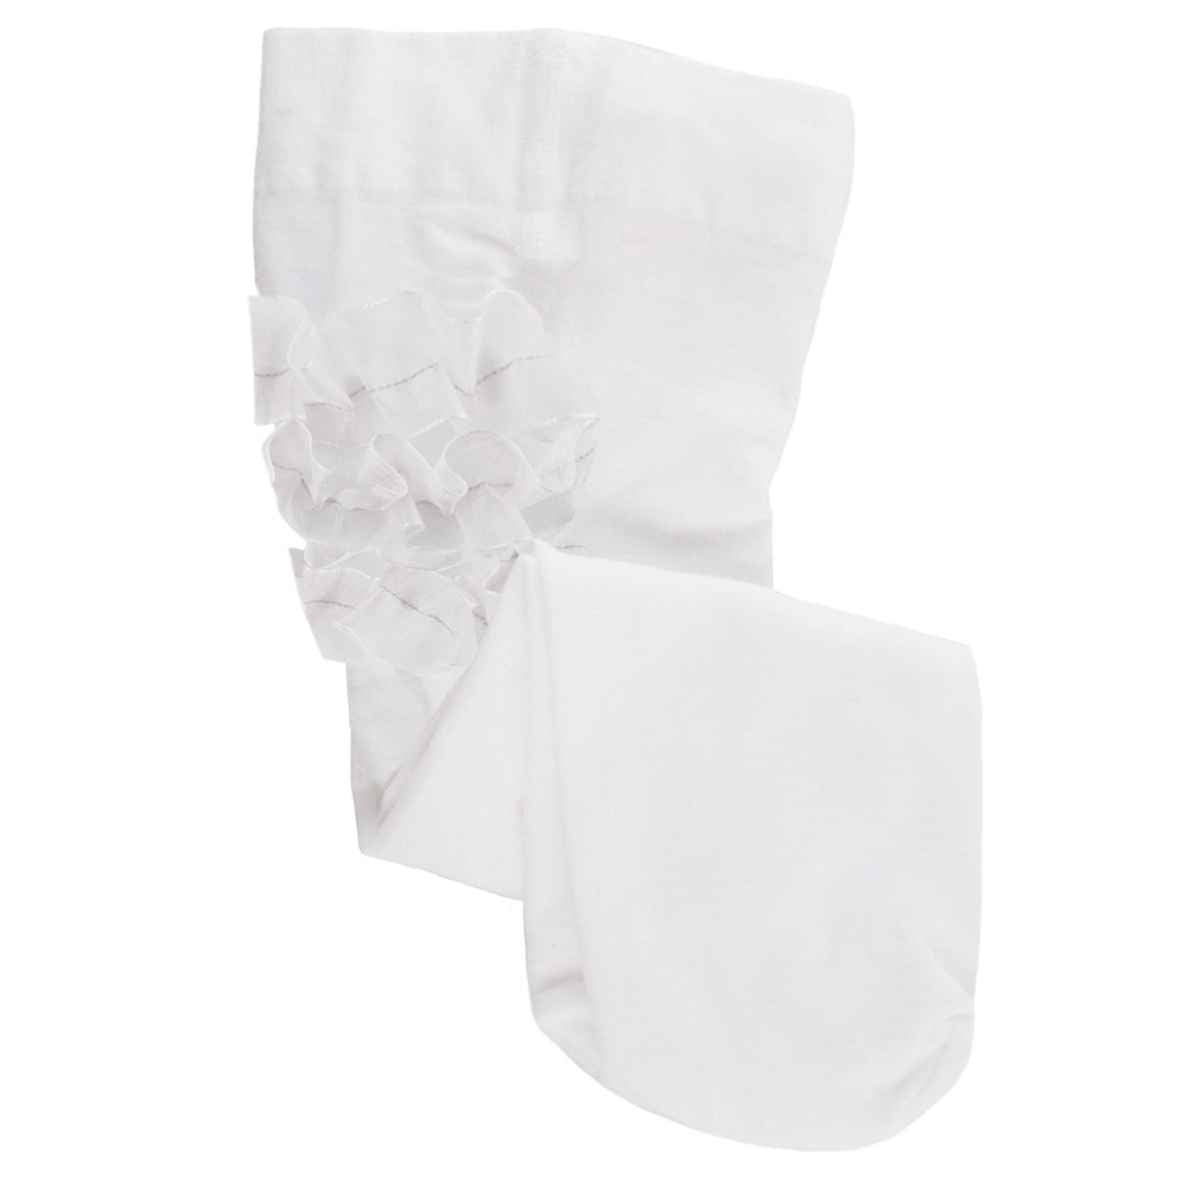 Infant White Ruffle Tights